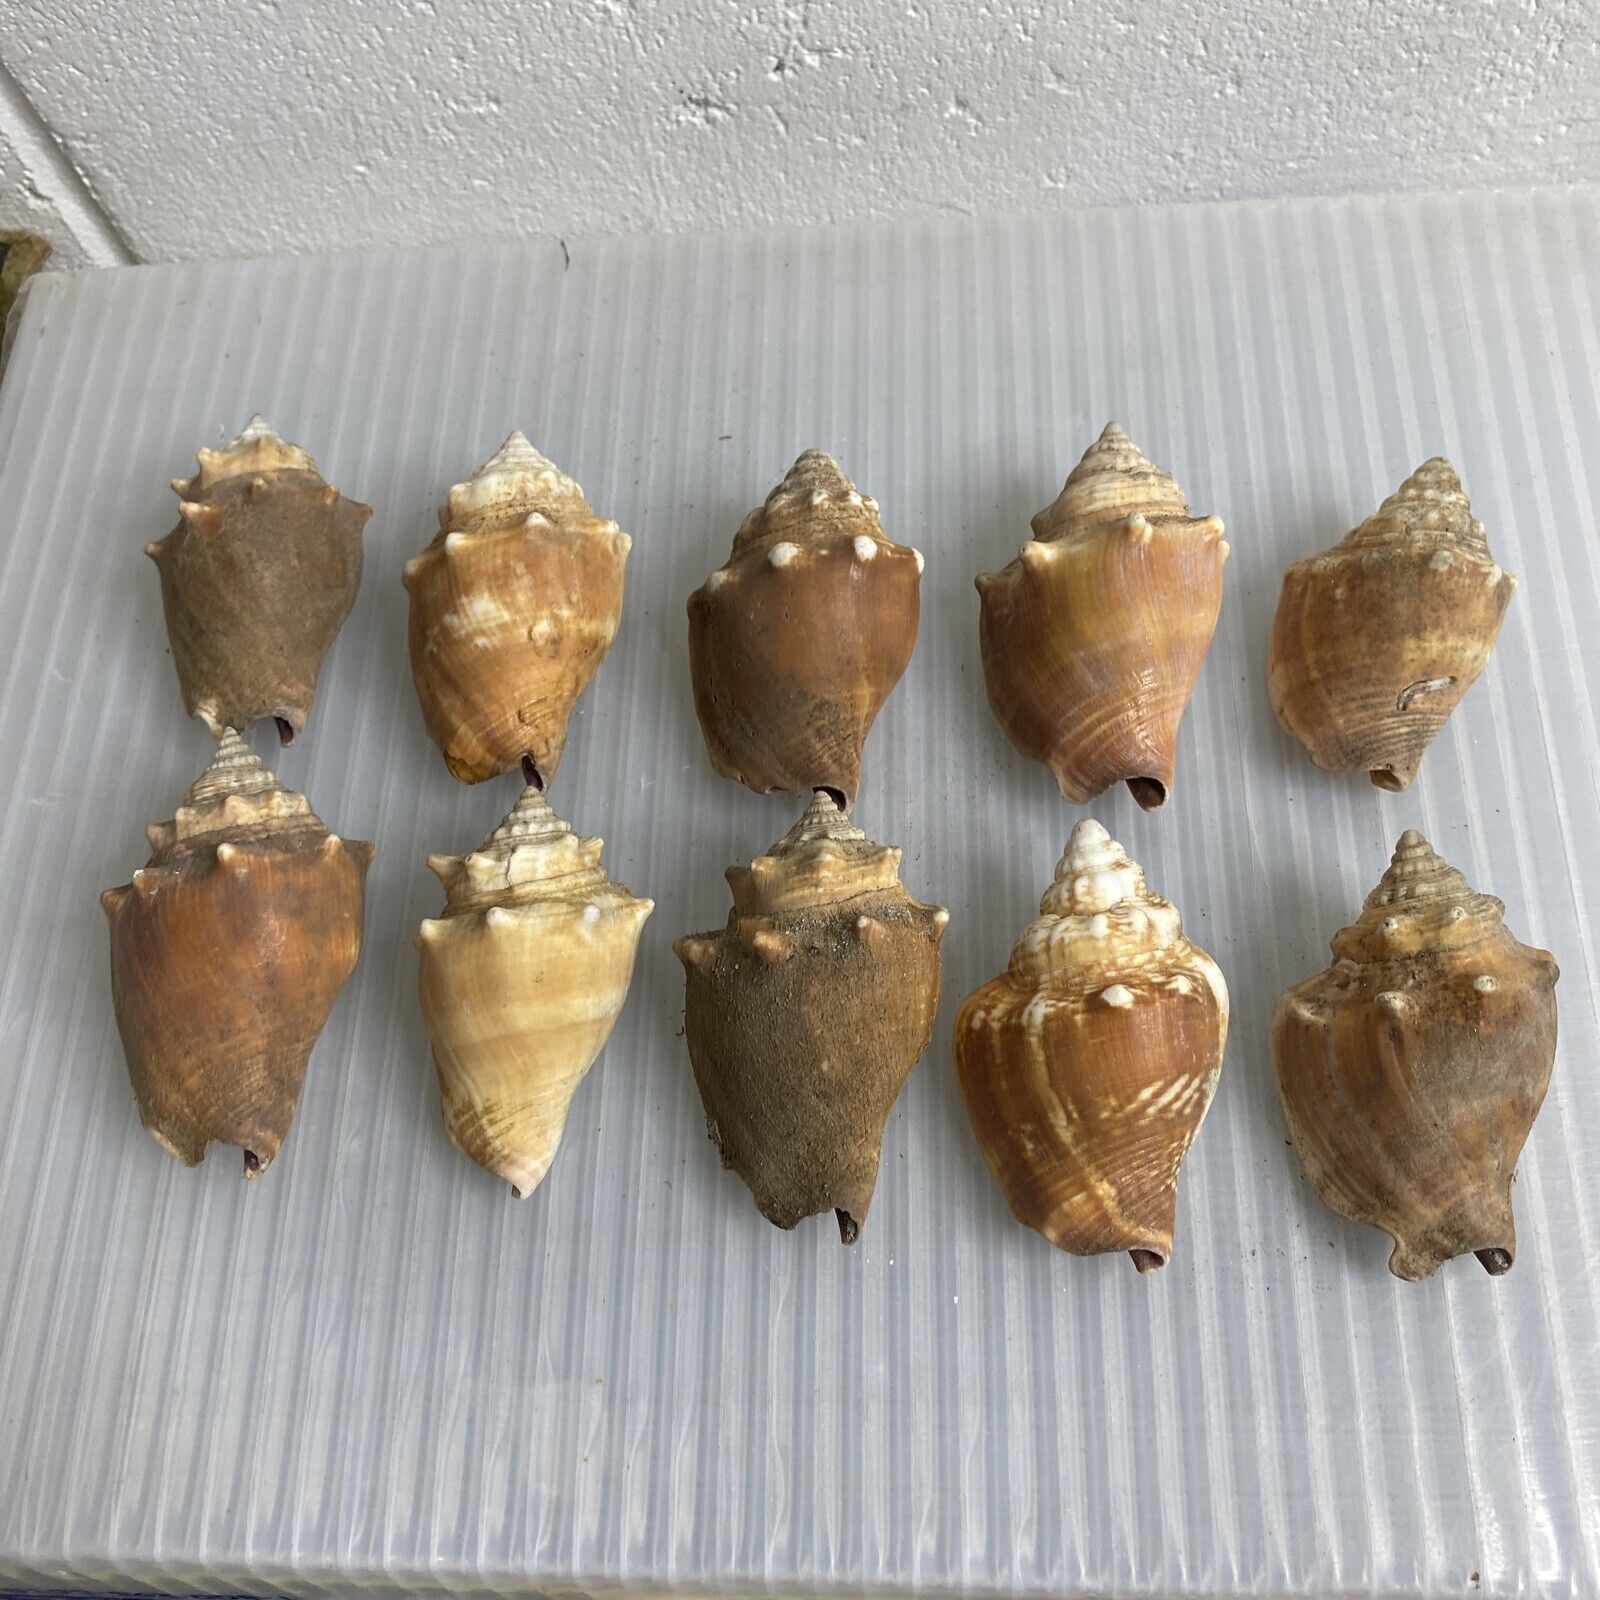 Seashell Lot Of 10 BROWN Shells Conch?